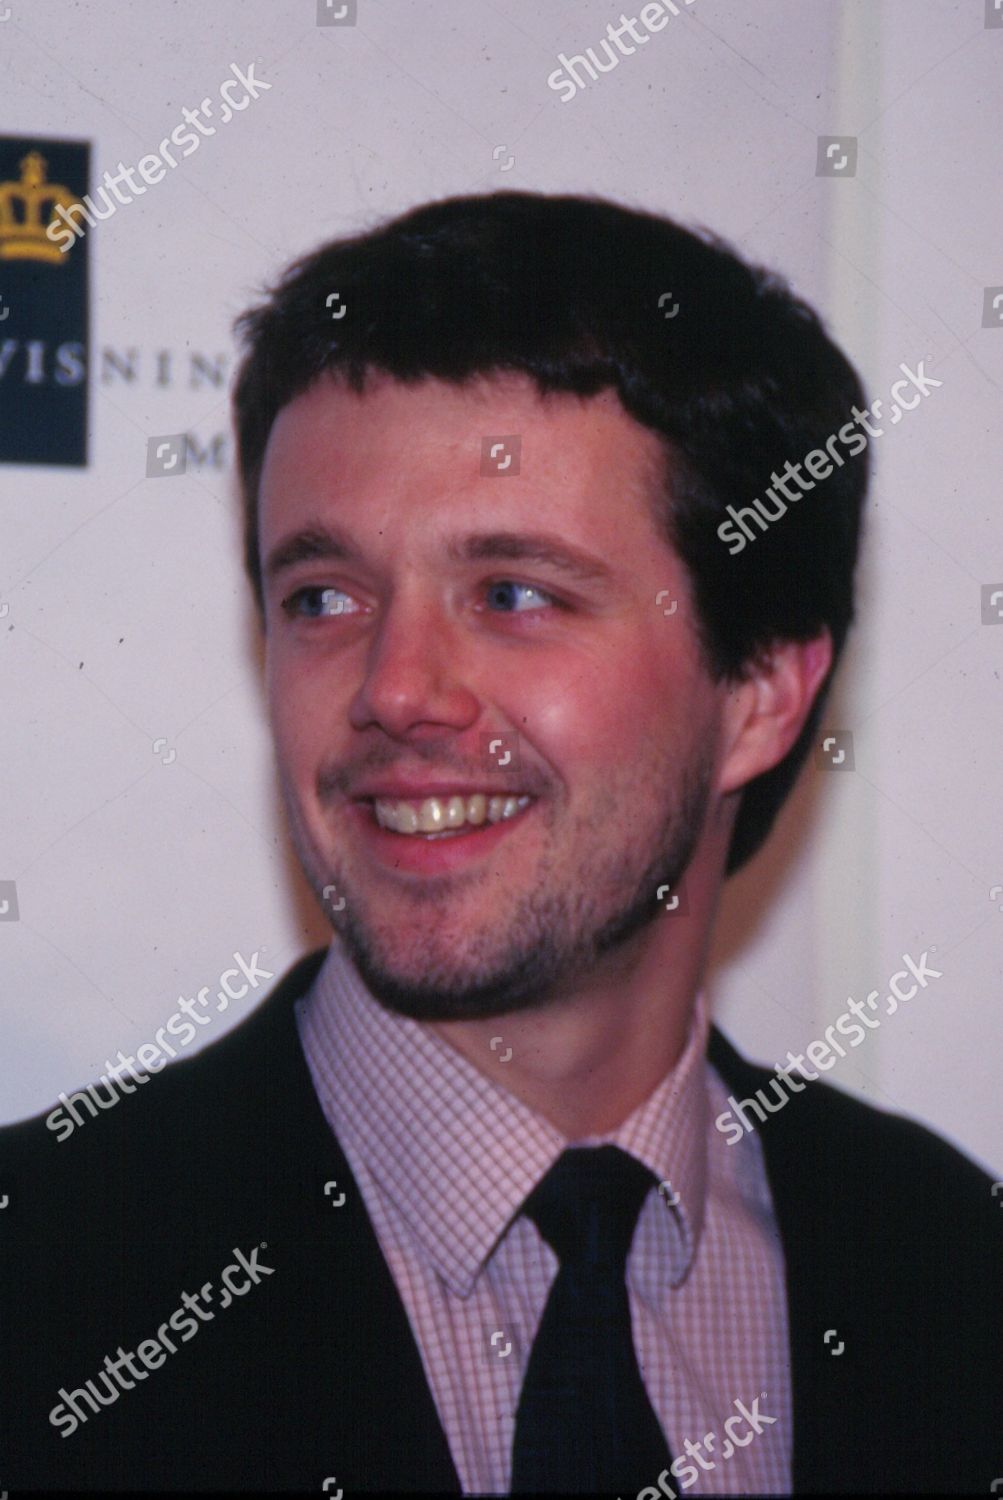 crown-prince-frederik-of-denmark-named-dane-of-the-year-2000-shutterstock-editorial-329381a.jpg